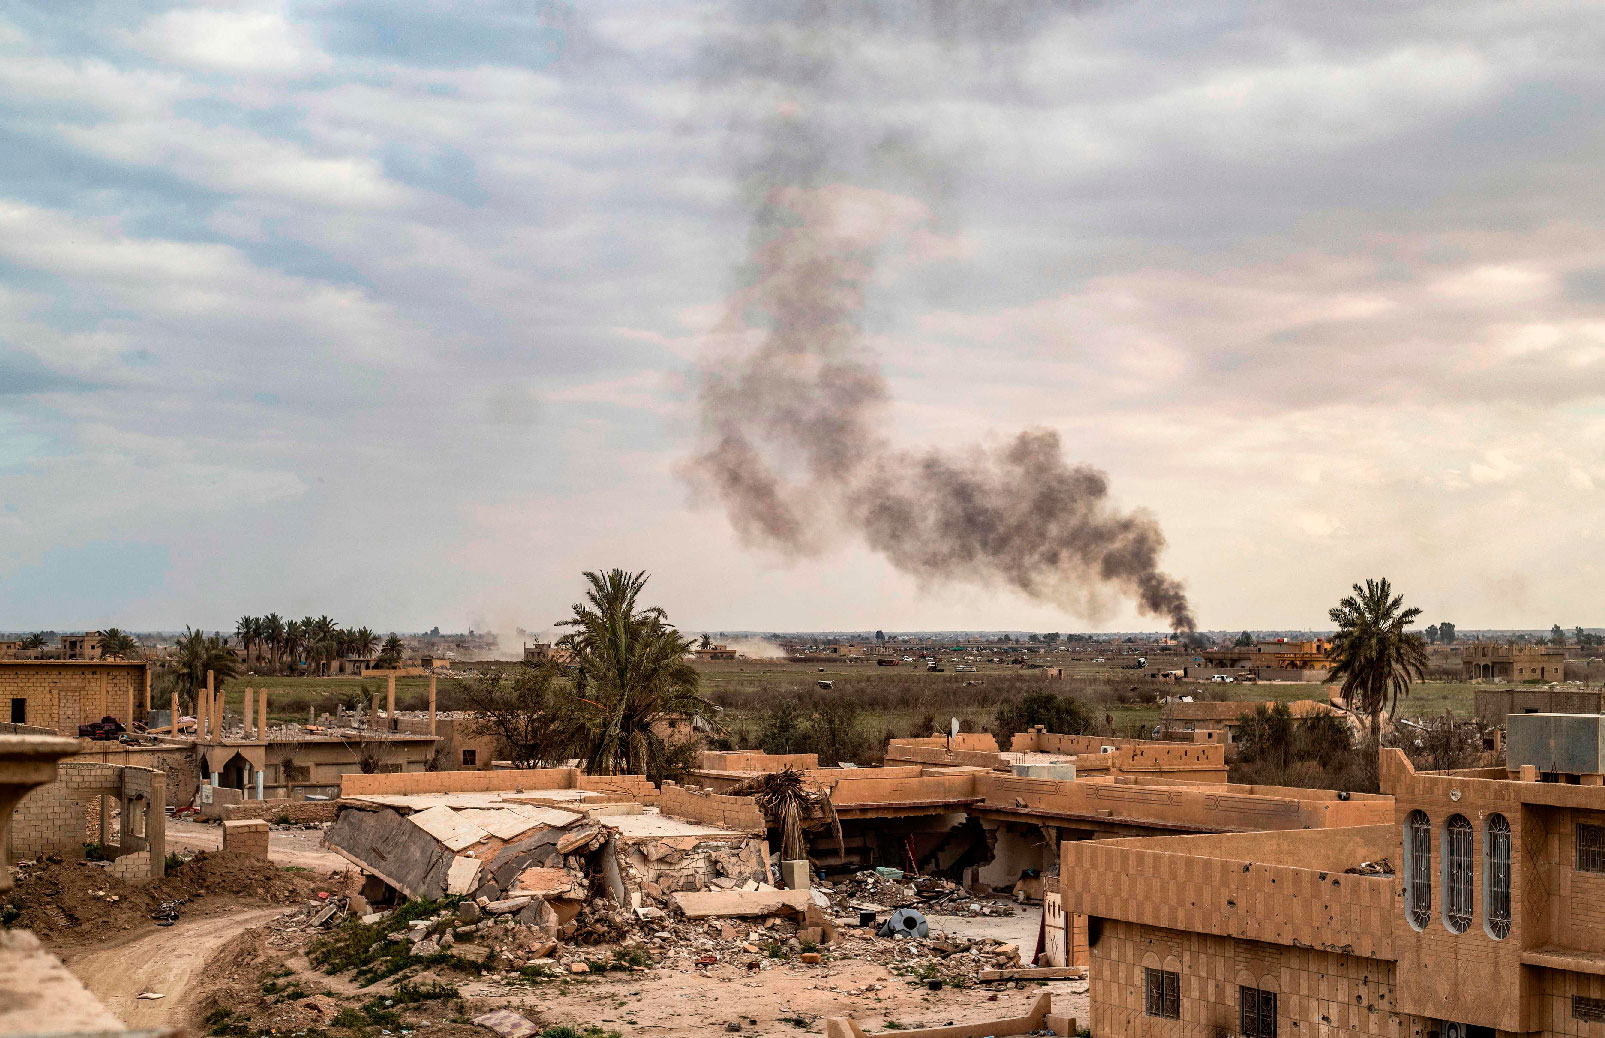 Smoke plumes billow from the remains of an Islamic State (IS) group jihadists' camp near the village of Baghouz in the eastern Syrian province of Deir Ezzor, on March 15, 2019.